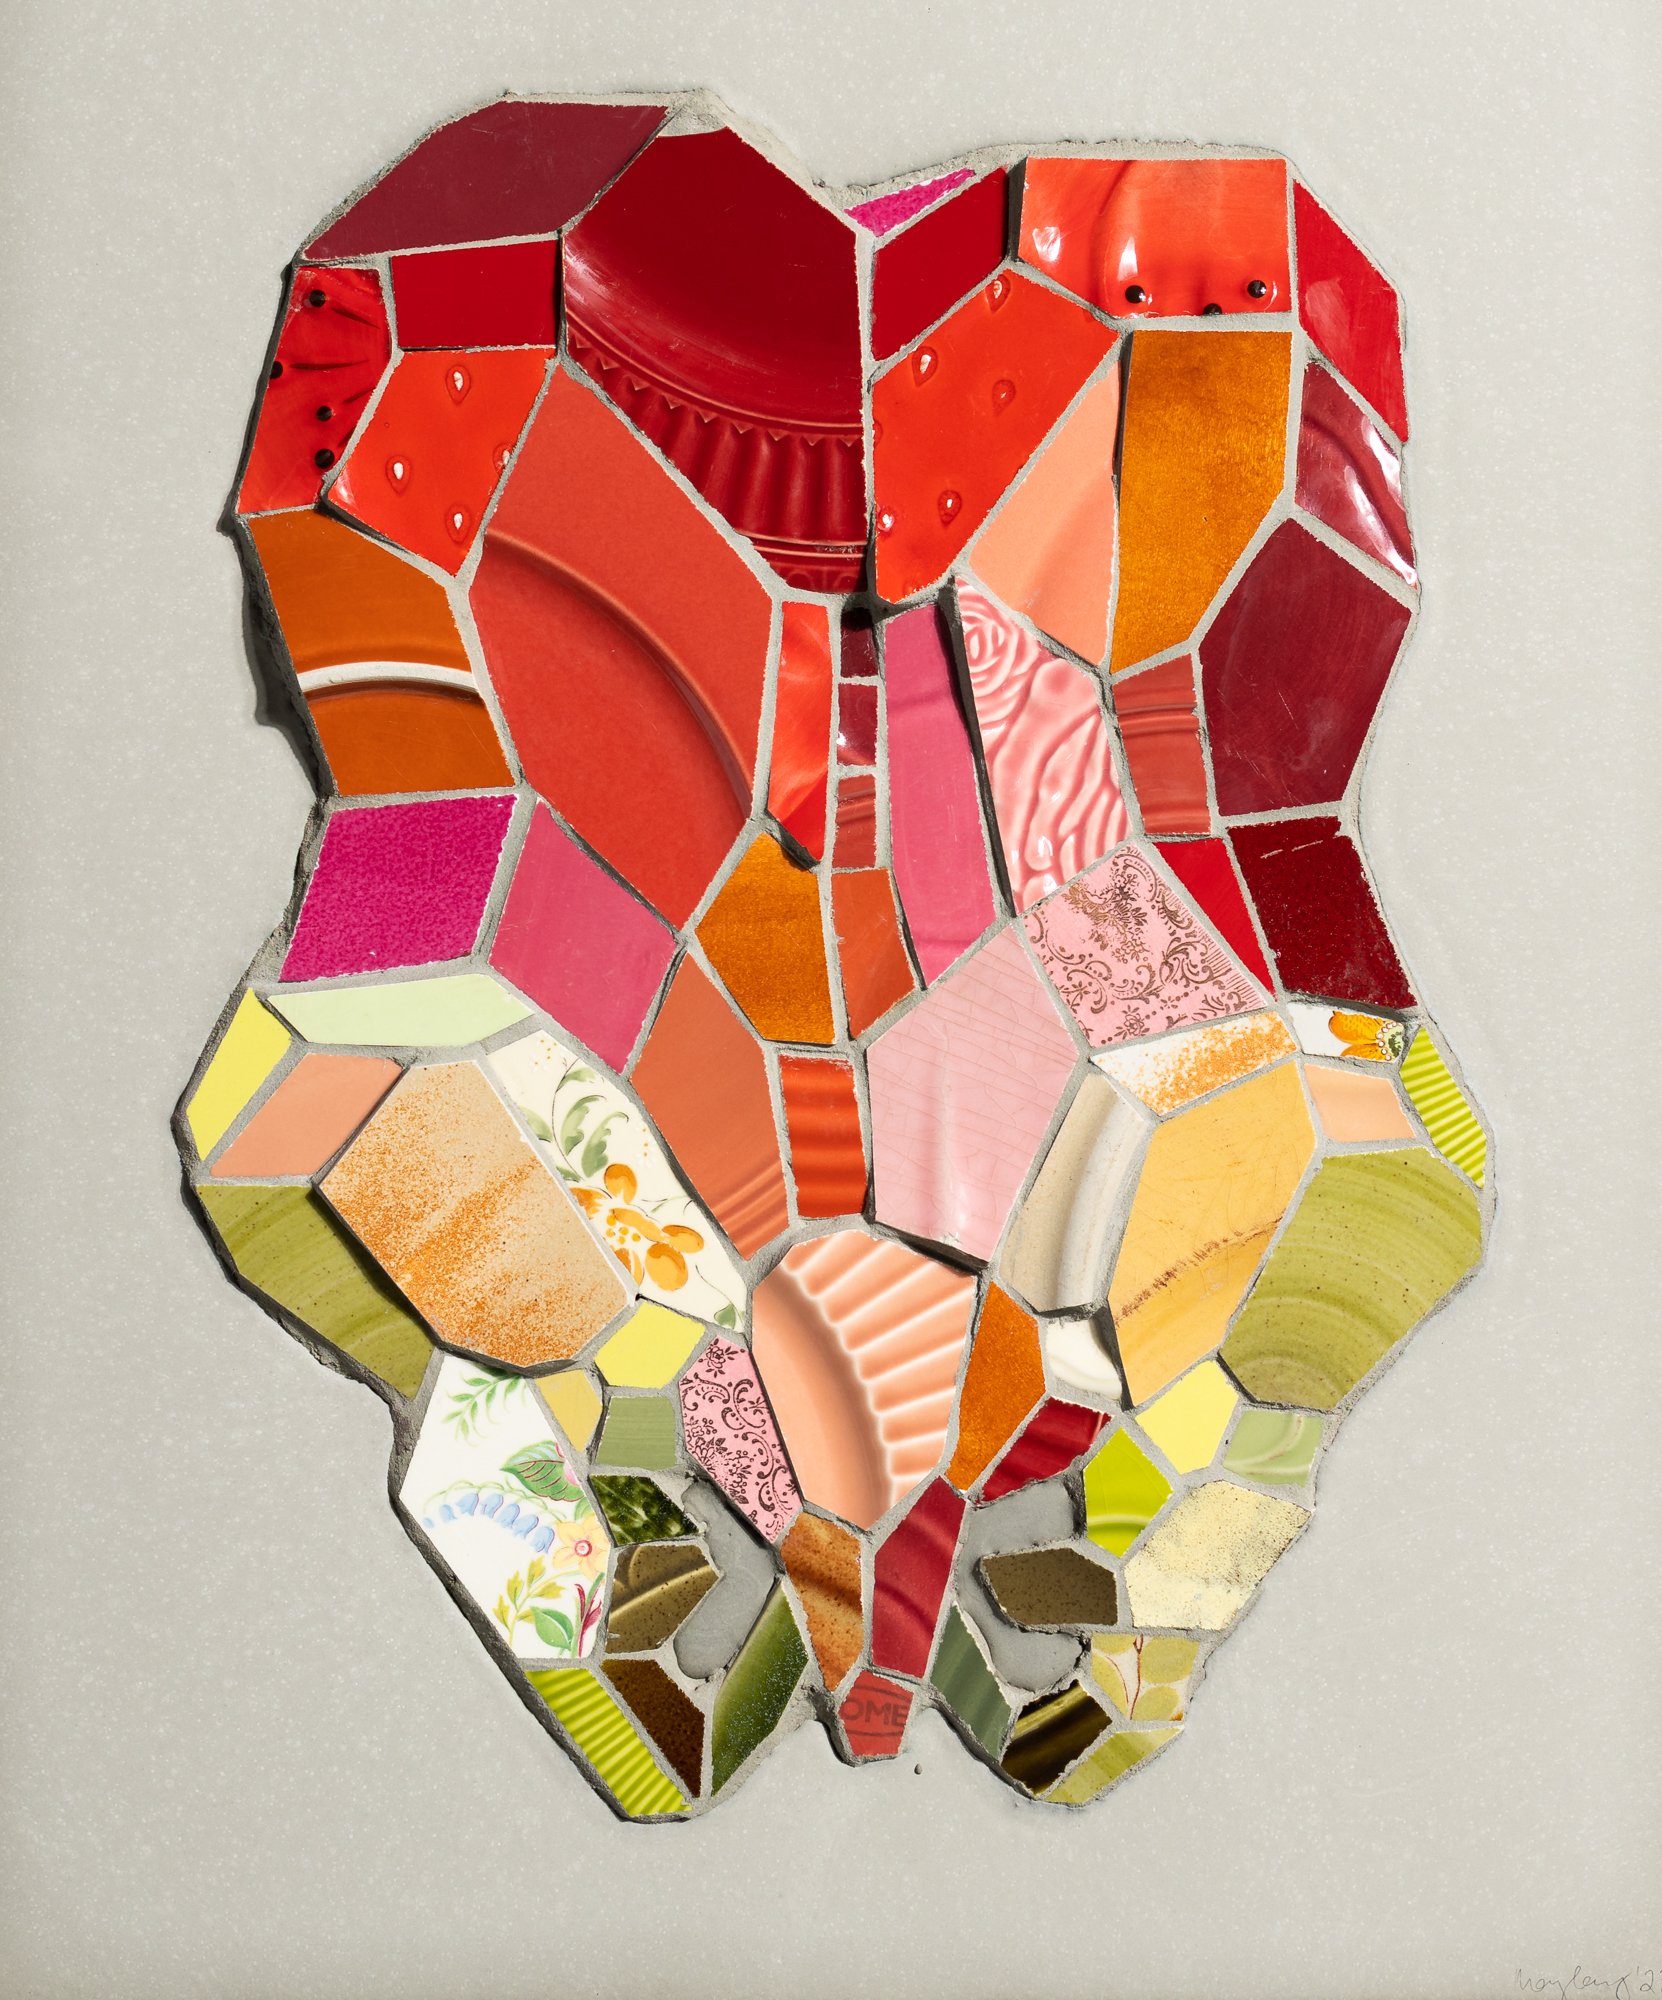 "A Fruitbowl" Anatomical Mixed Media Mosaic by Mary Lacy @ Soapbox Arts Gallery, Burlington, Vermont 